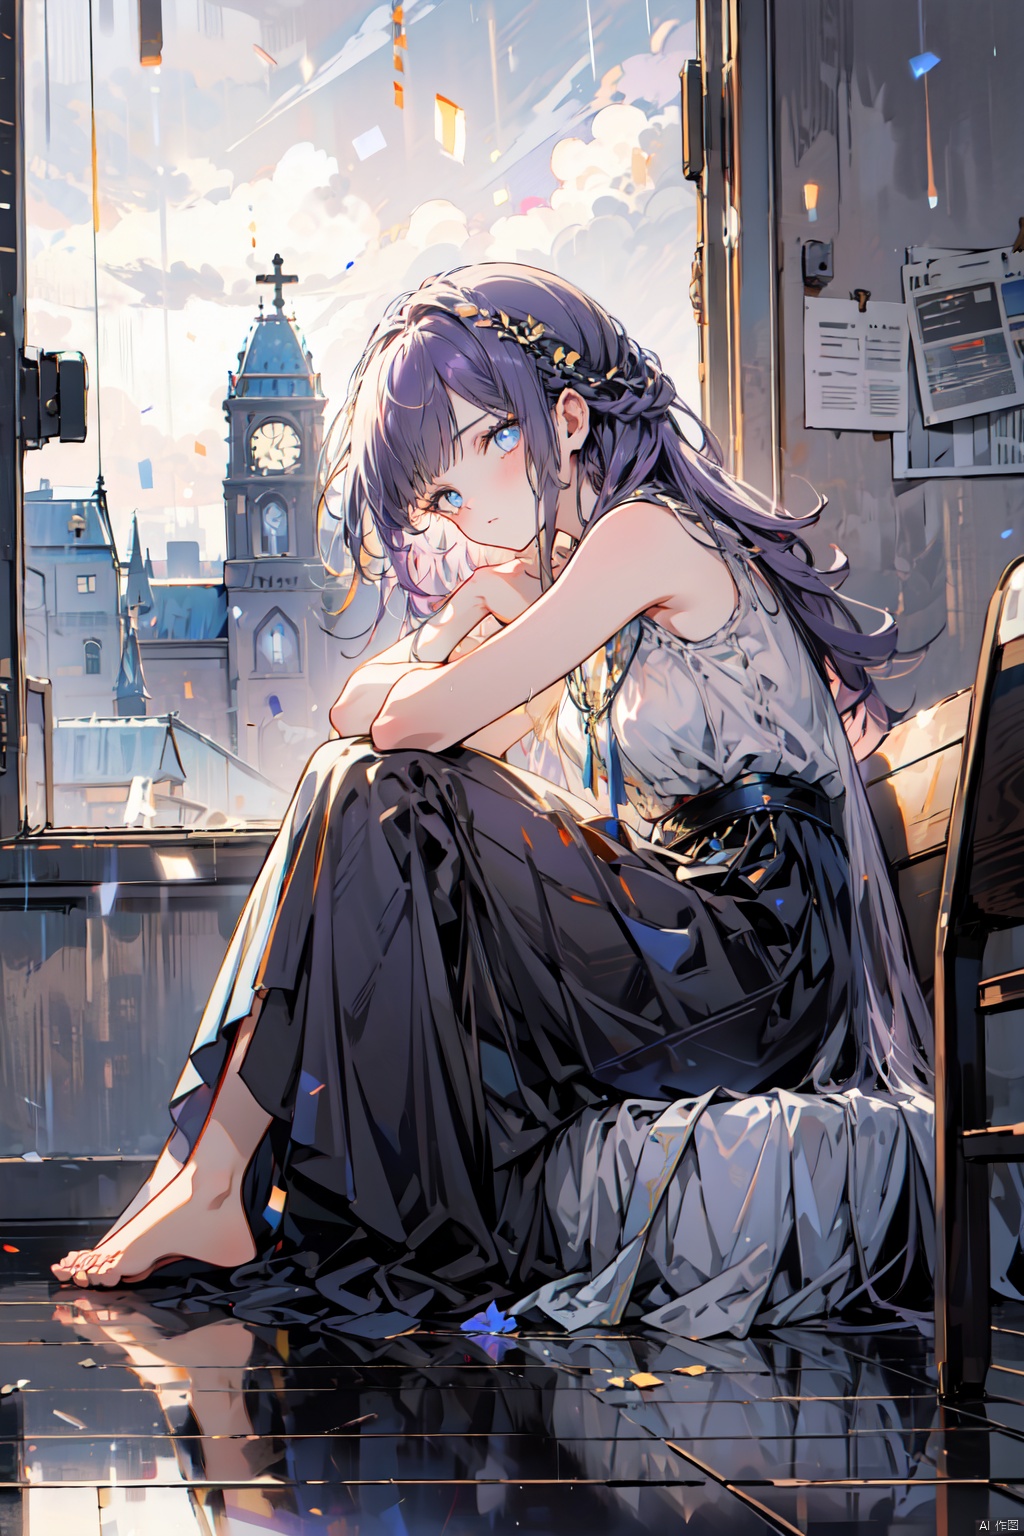  1 girl，l purple hair, gold pupils, blue eyes on the side of the head, sitting posture,Sitting by the window, leaning against the window, indoor background, Abandoned church,window, rainy day, reflection, night,Sleeveless, long black dress, barefoot, staring out of the window.High-quality, clear and correct human body